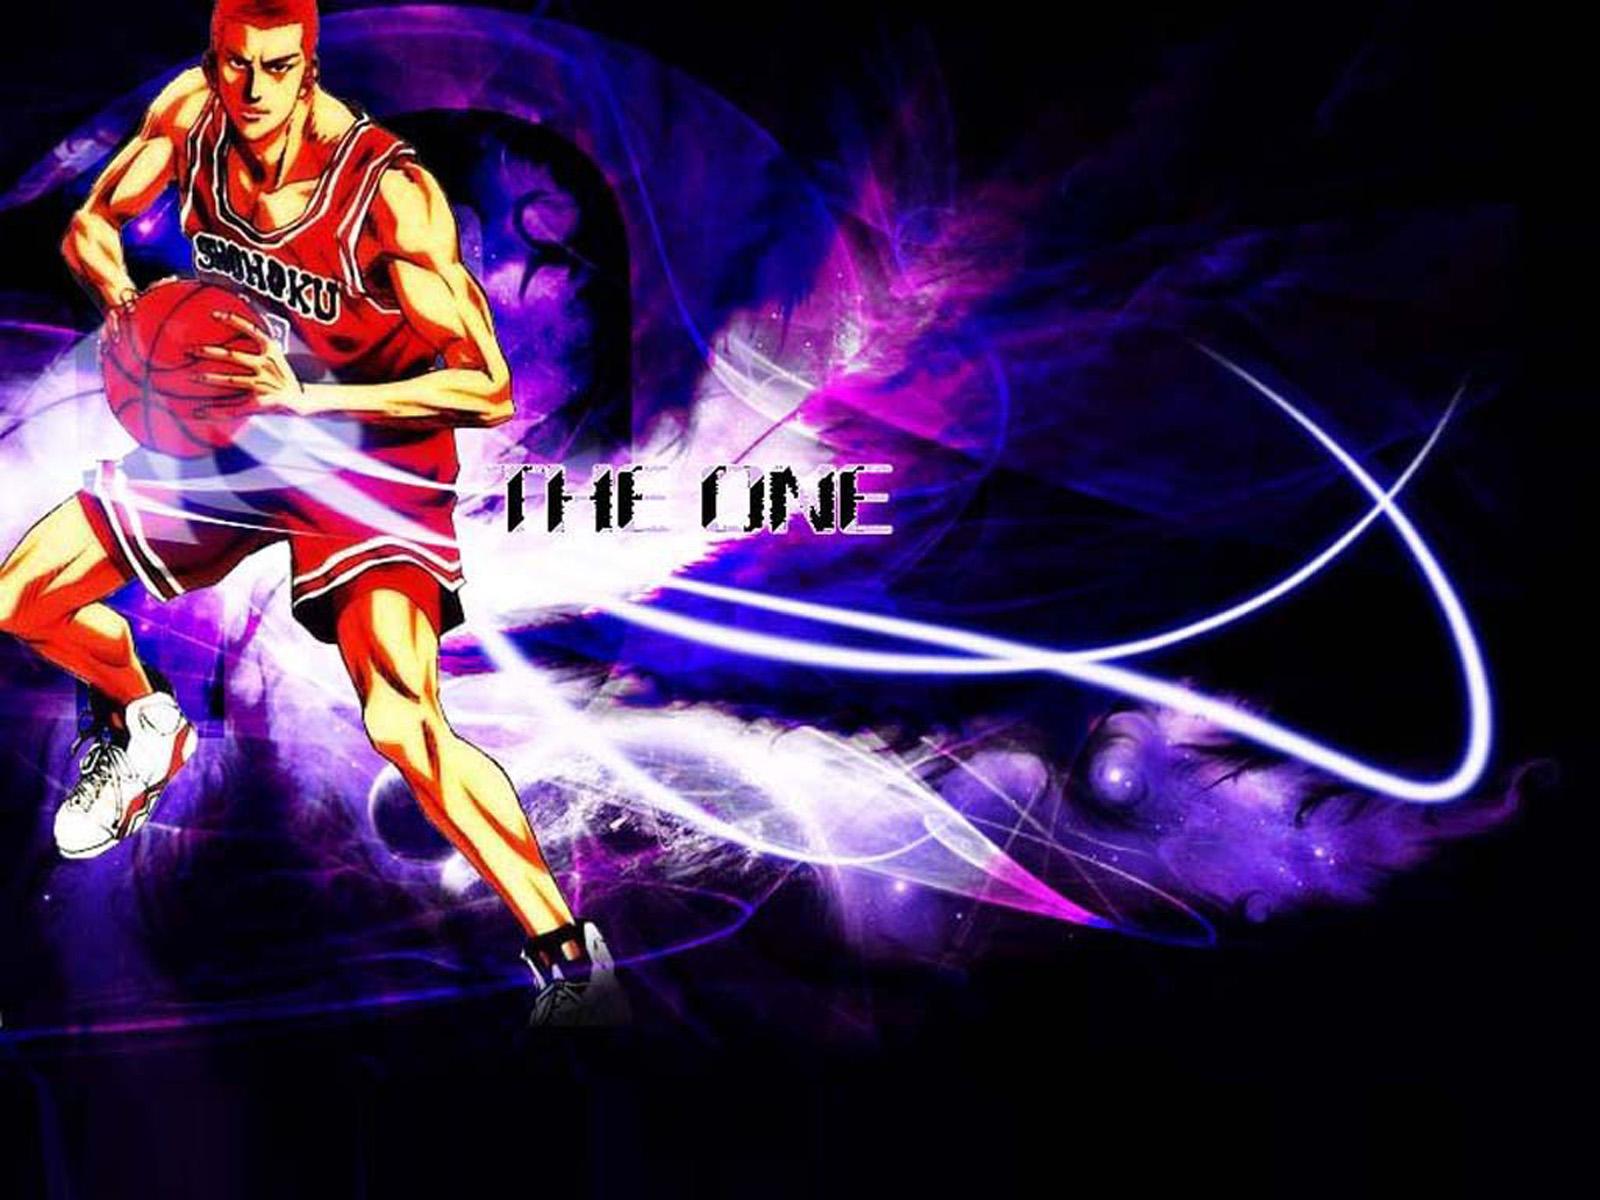 Free Download Pin Anime World Slam Dunk Wallpaper Download 1600x10 For Your Desktop Mobile Tablet Explore 75 Slam Dunk Anime Wallpapers Slam Dunk Anime Wallpapers Slam Dunk Anime Wallpaper